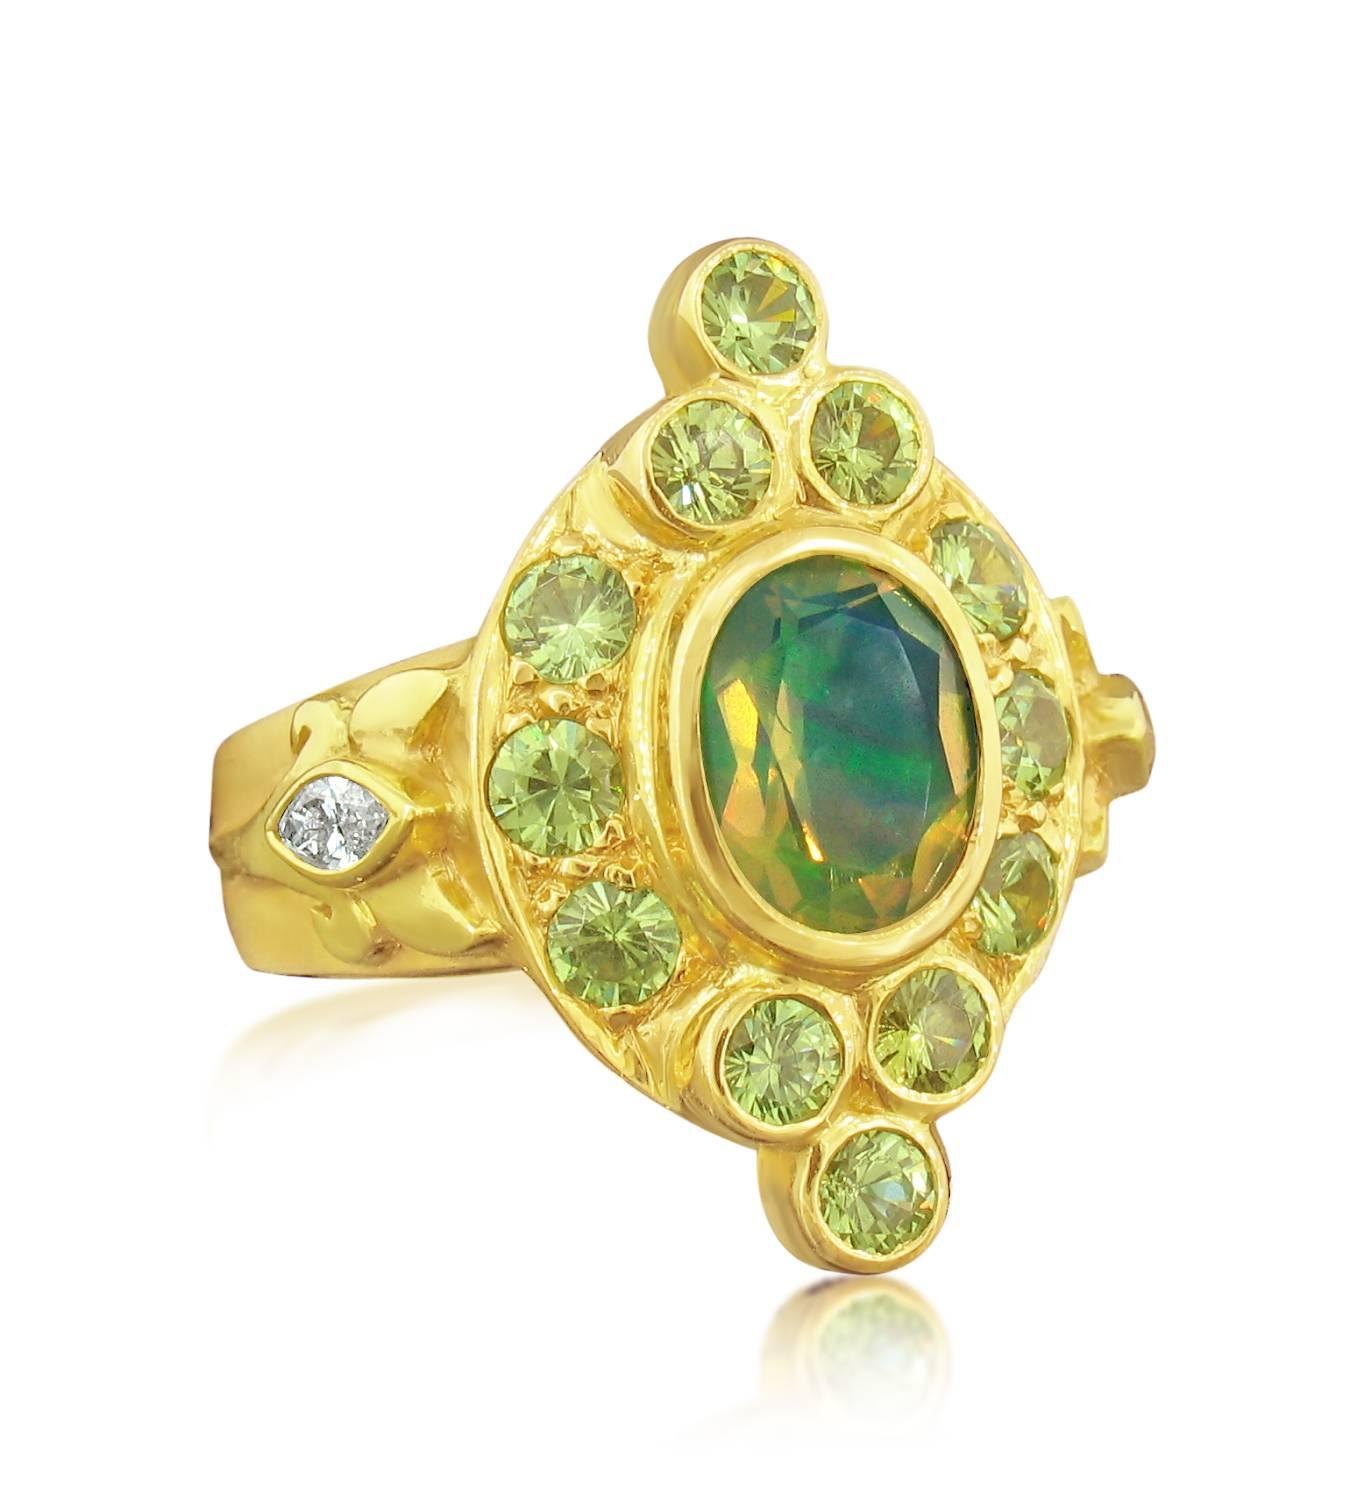 This ring was designed and made by well known designer Paula Crevoshay. It contains a very unique, beautifully colored Mexican Opal weighing 1.29 carats.  It is surrounded by 12 rare Demantoid Garnets weighing 1.70 carats  These are the rarest of